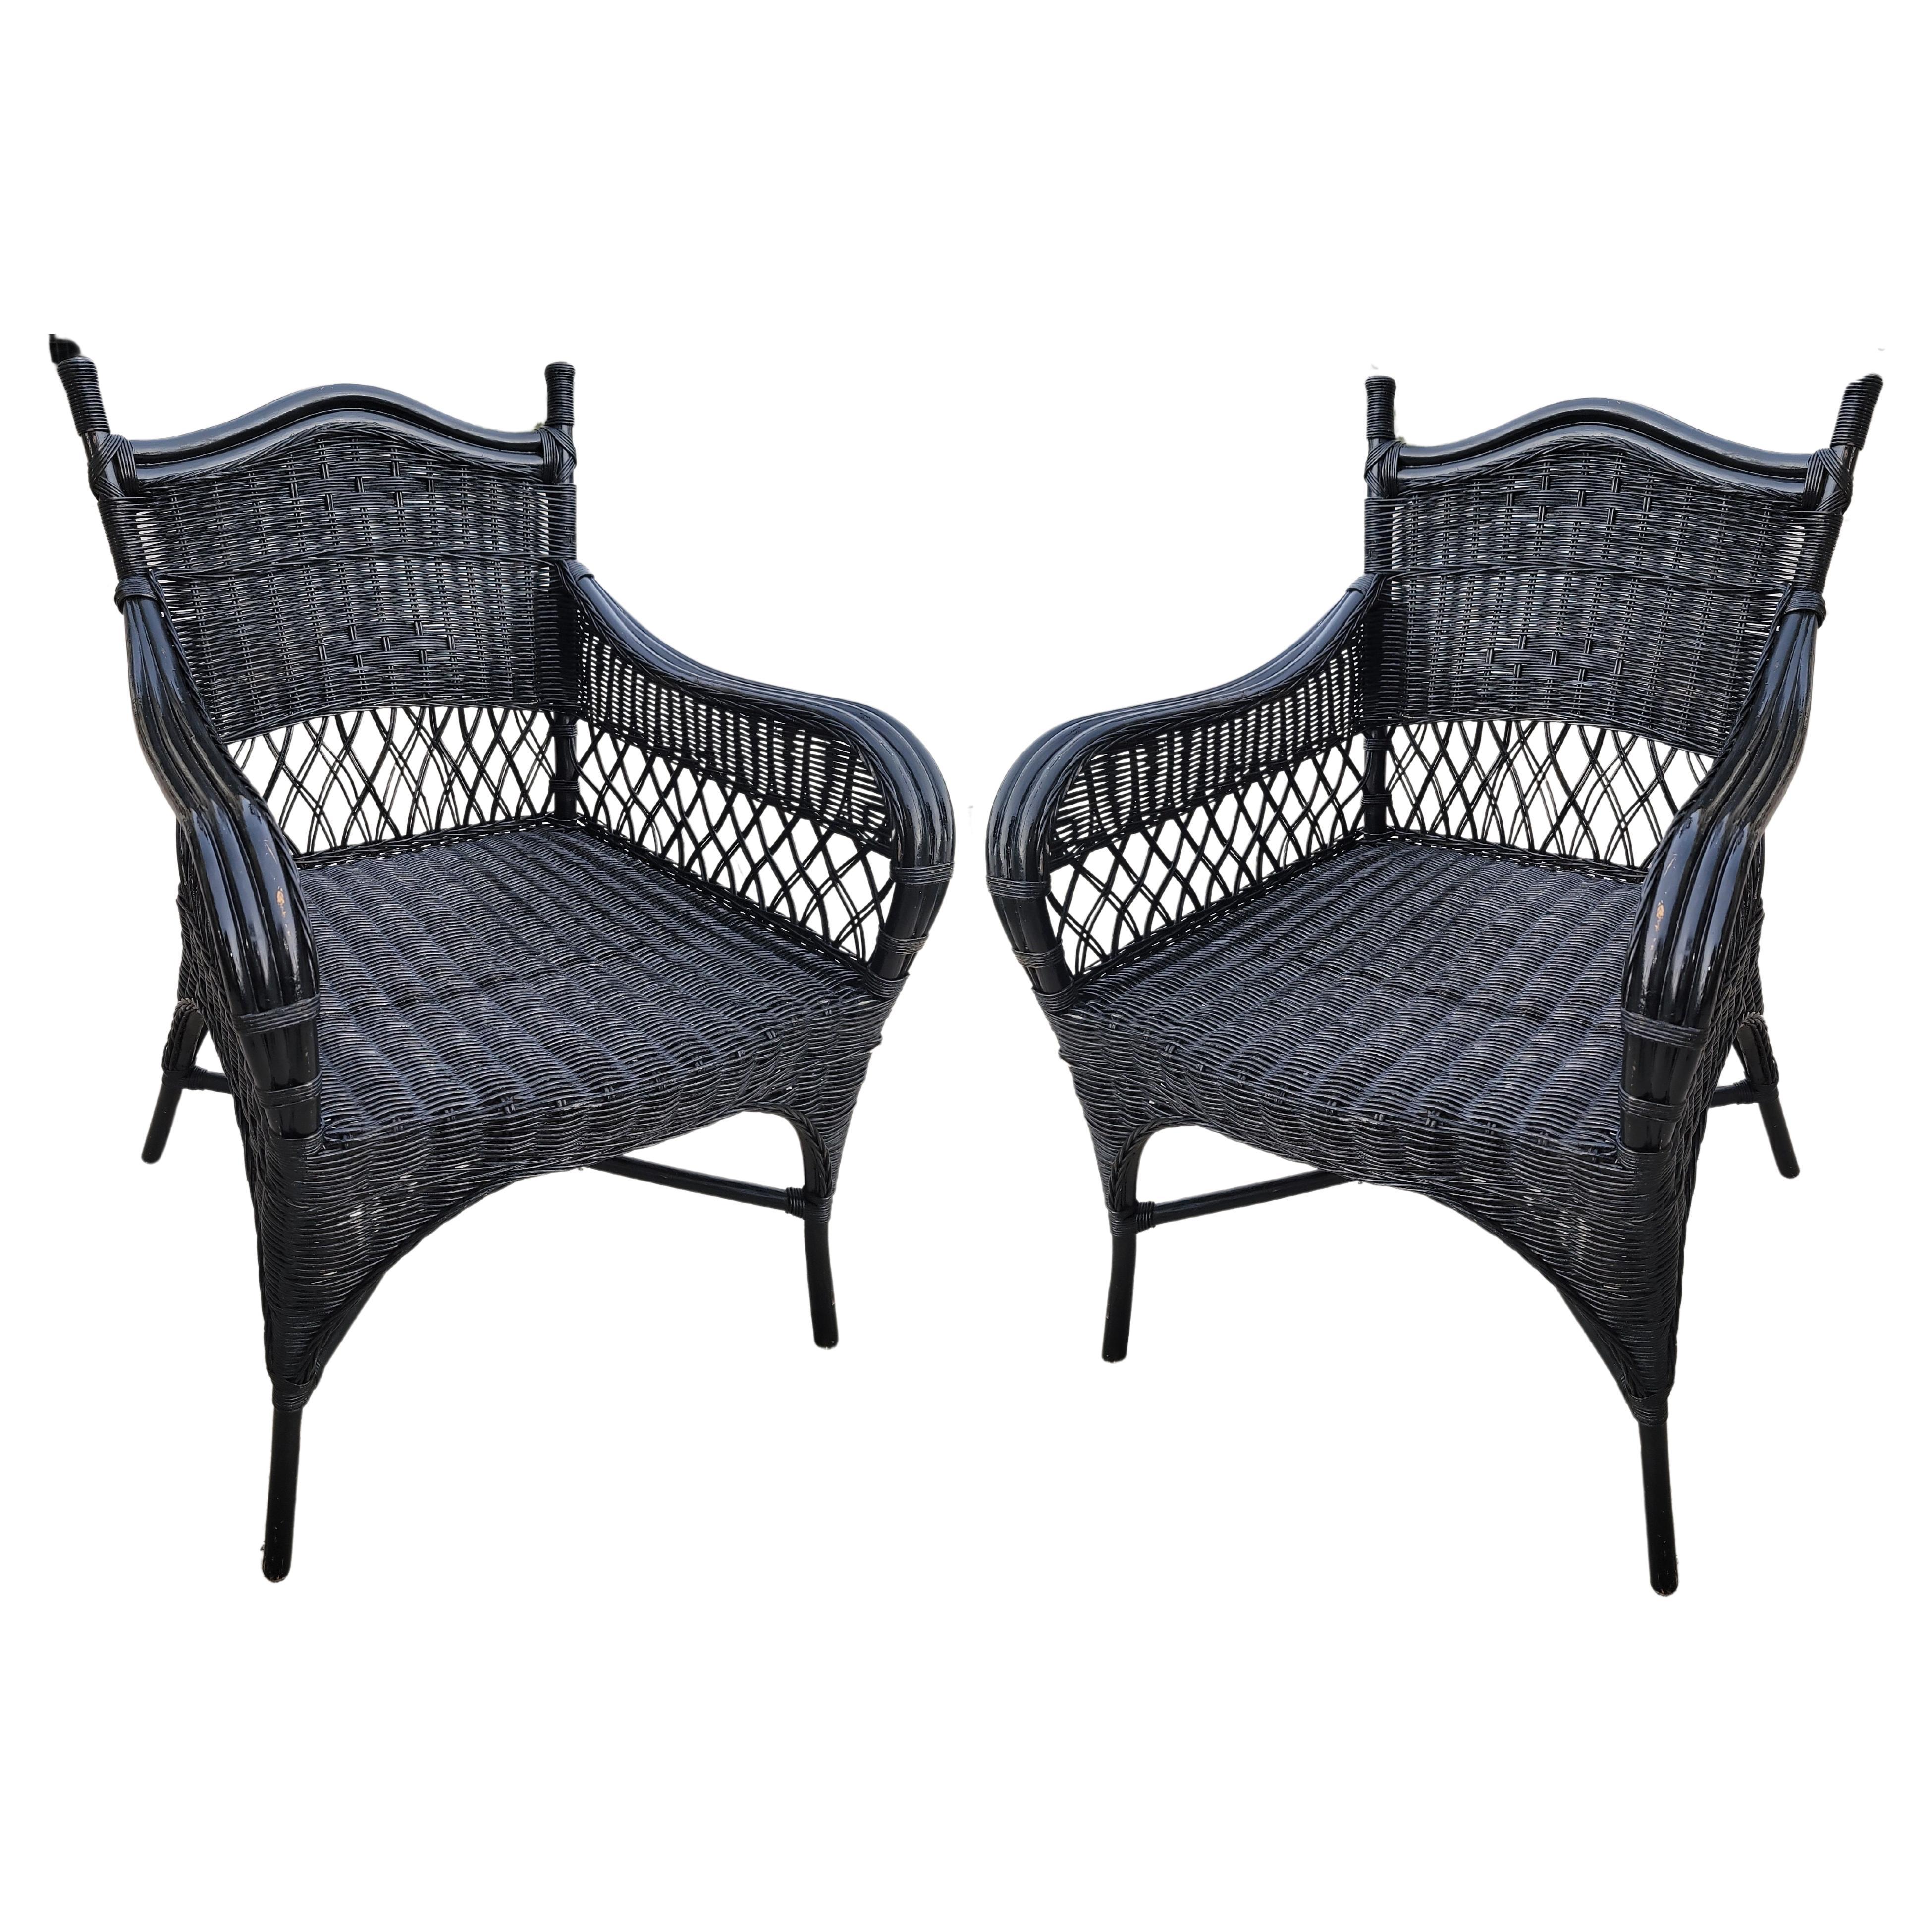 20th Century Bar Harbor Style Wicker Chairs -Pair For Sale